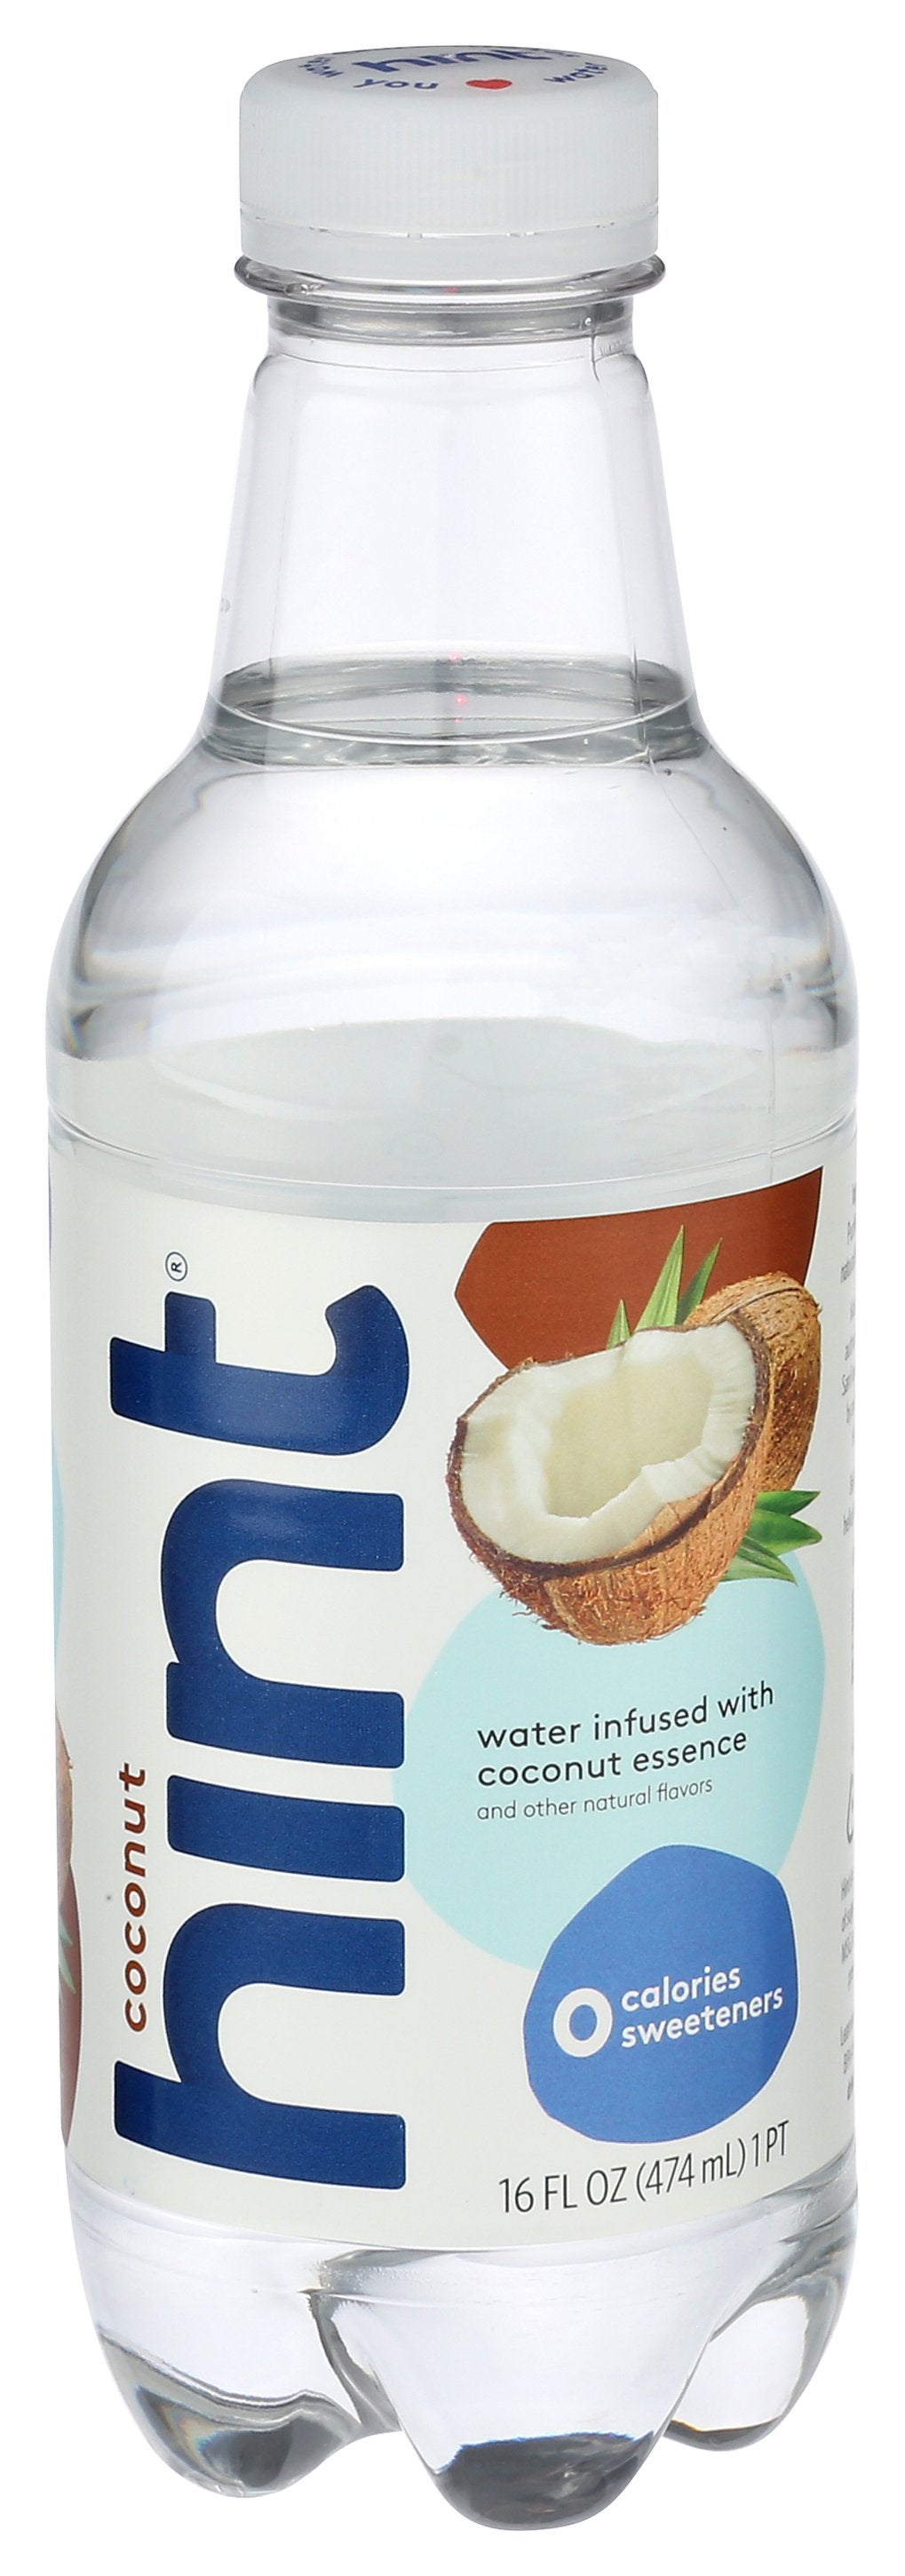 HINT WATER COCONUT - Case of 12